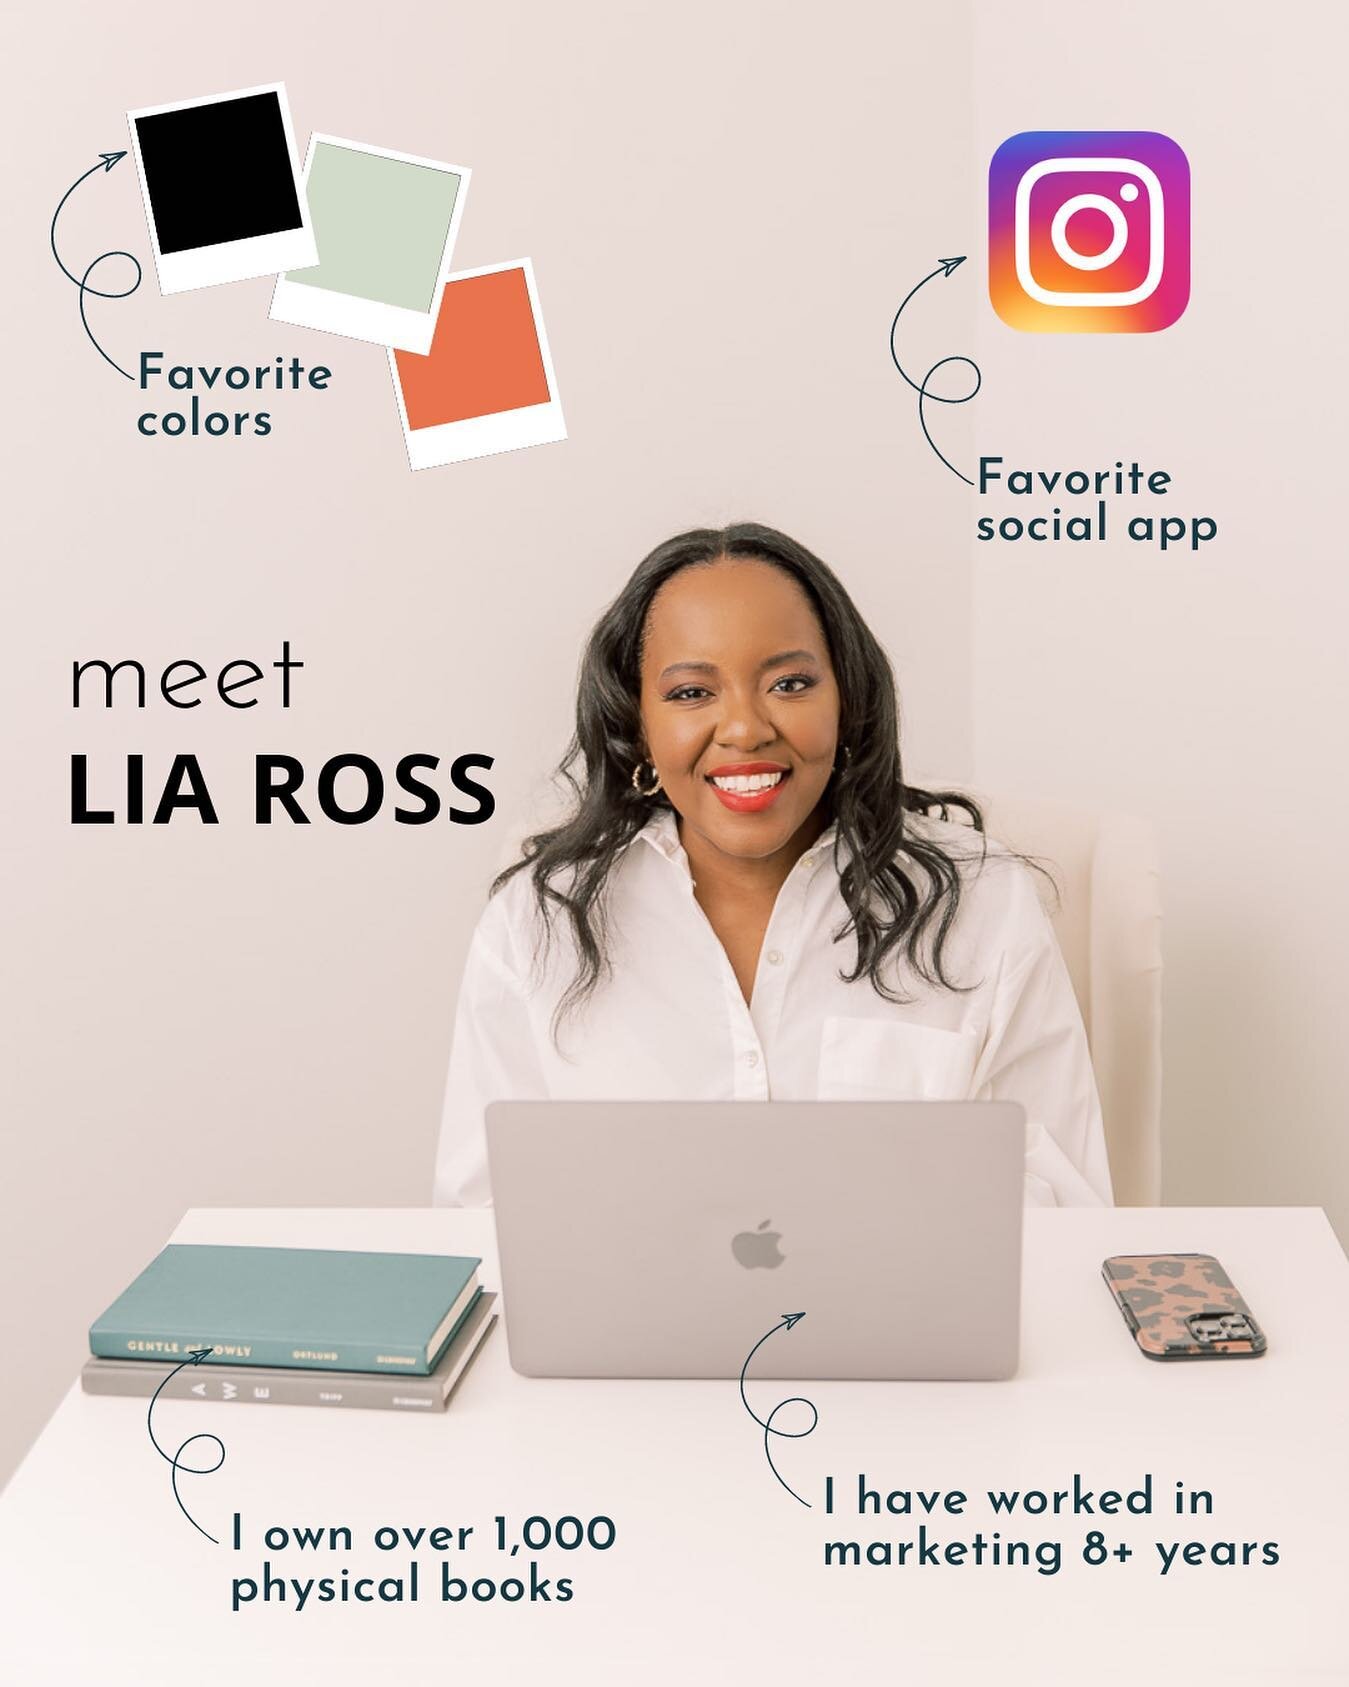 MEET THE MARKETER 🎙️

Social media is about being social, thought it would be fun to put a face to the content here and tell you a little about me. Let me know if we have anything in common 👀

📊 I have worked in marketing for 8+ years.  Whether I'